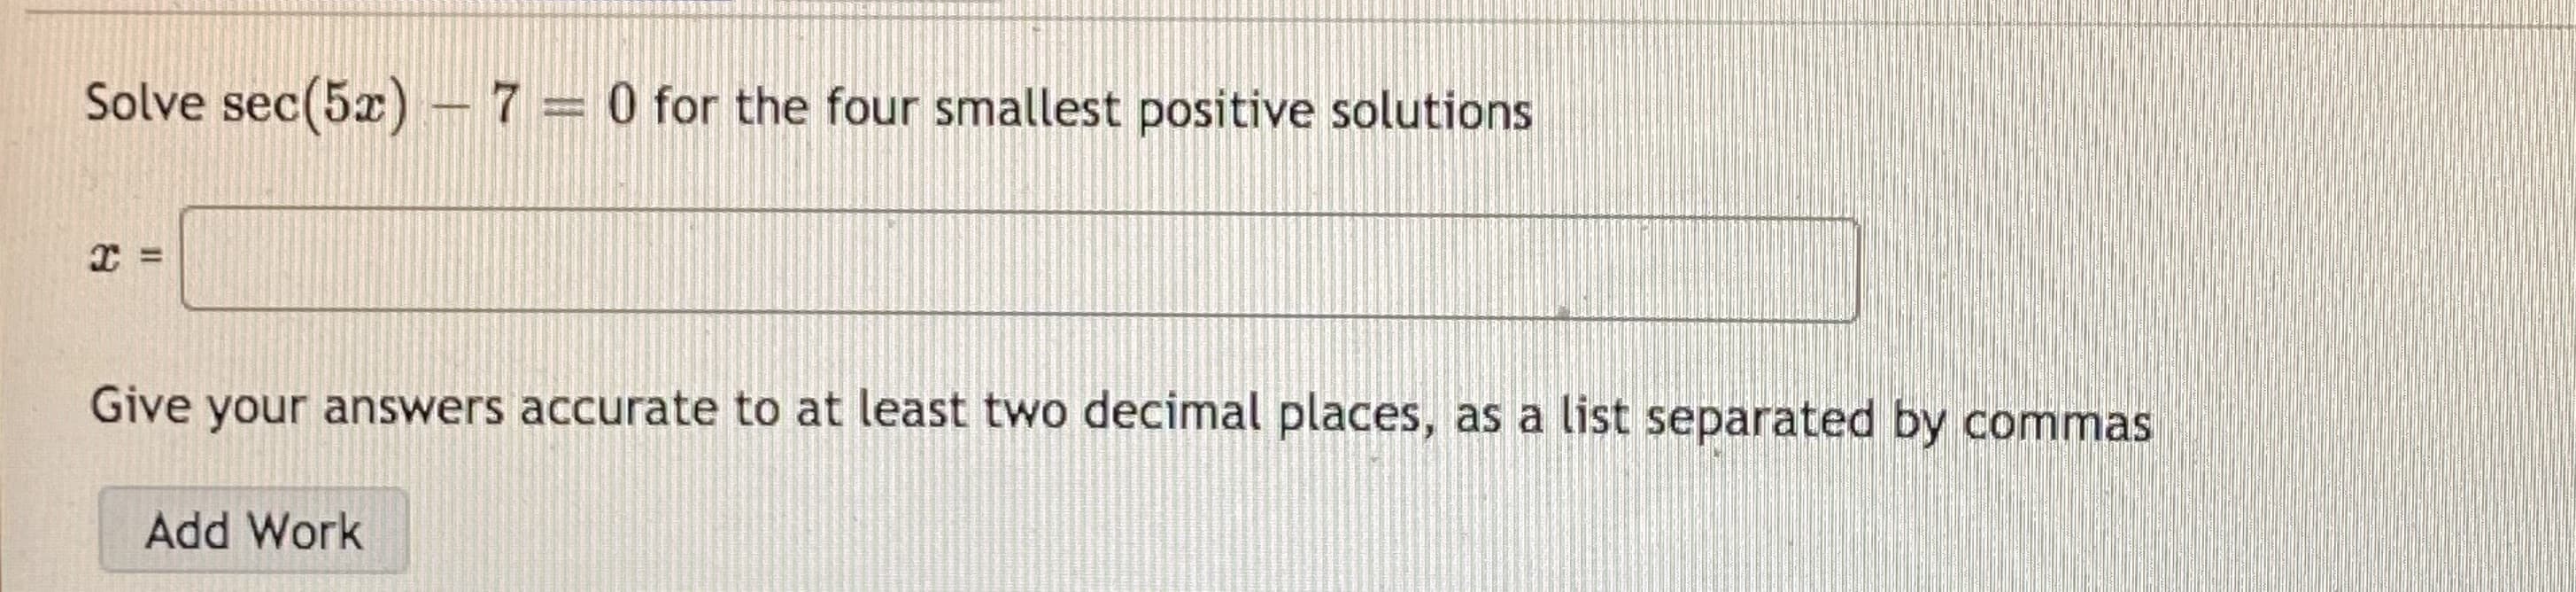 Solve sec(5x) - 7= 0 for the four smallest positive solutions
Give your answers accurate to at least two decimal places, as a list separated by commas
